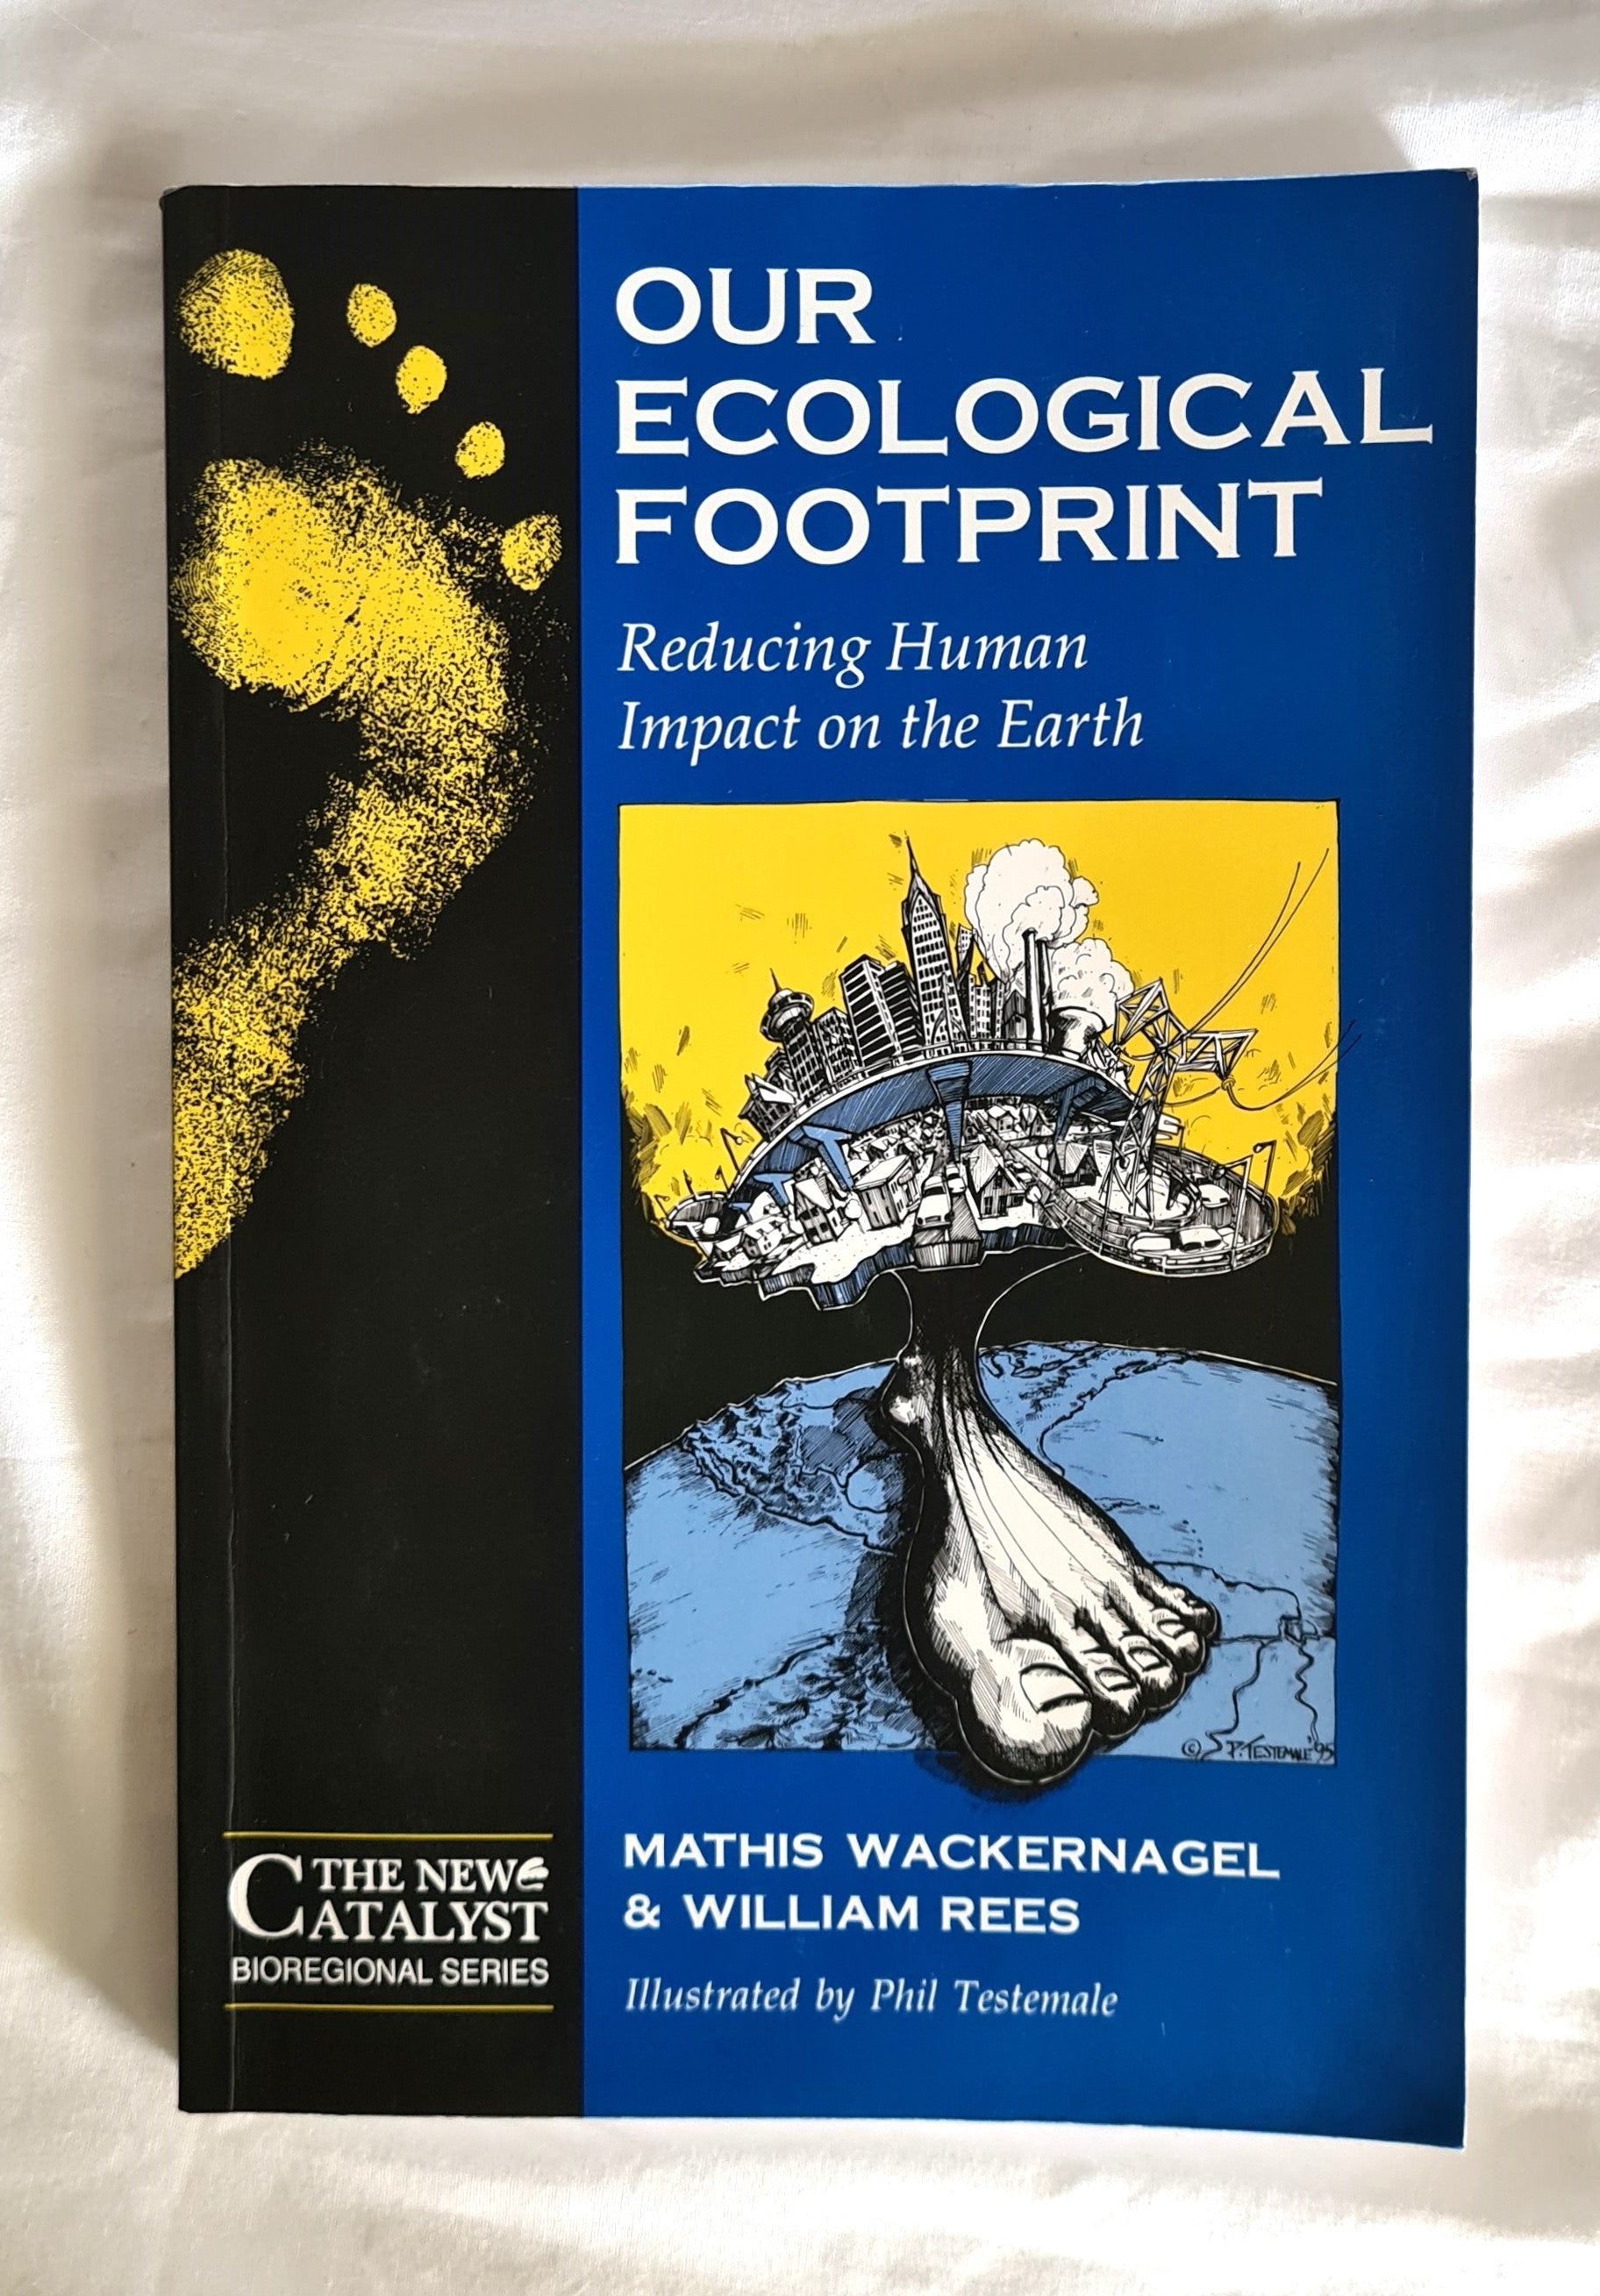 Our Ecological Footprint  Reducing Human Impact on the Earth  by Mathis Wackernagel and William Rees  Illustrated by Phil Testemale